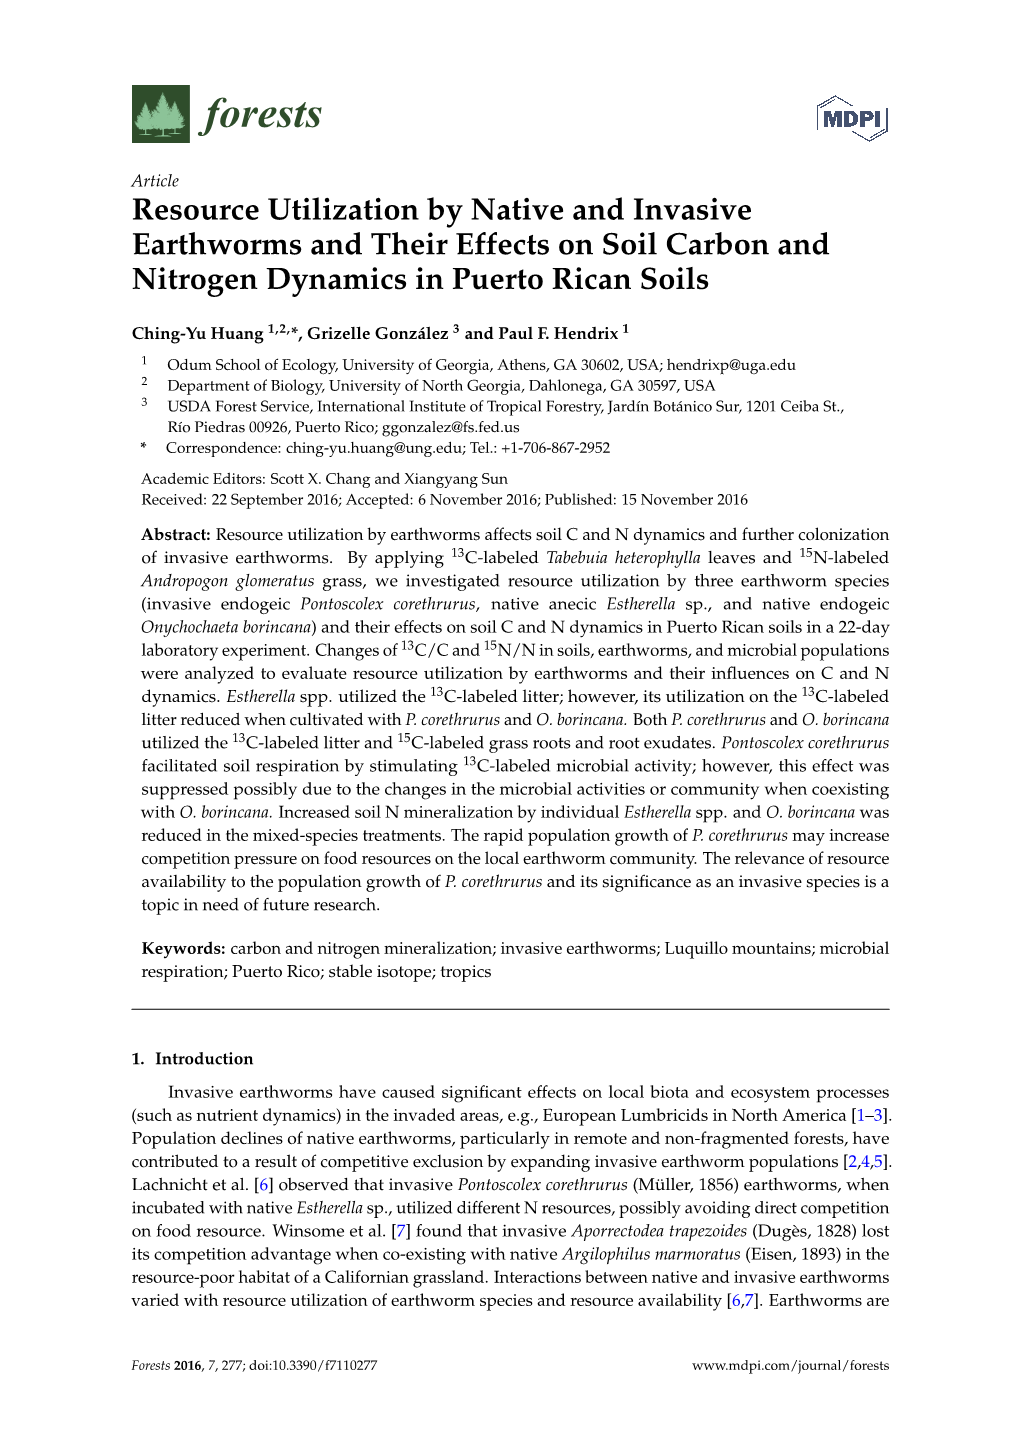 Resource Utilization by Native and Invasive Earthworms and Their Effects on Soil Carbon and Nitrogen Dynamics in Puerto Rican Soils